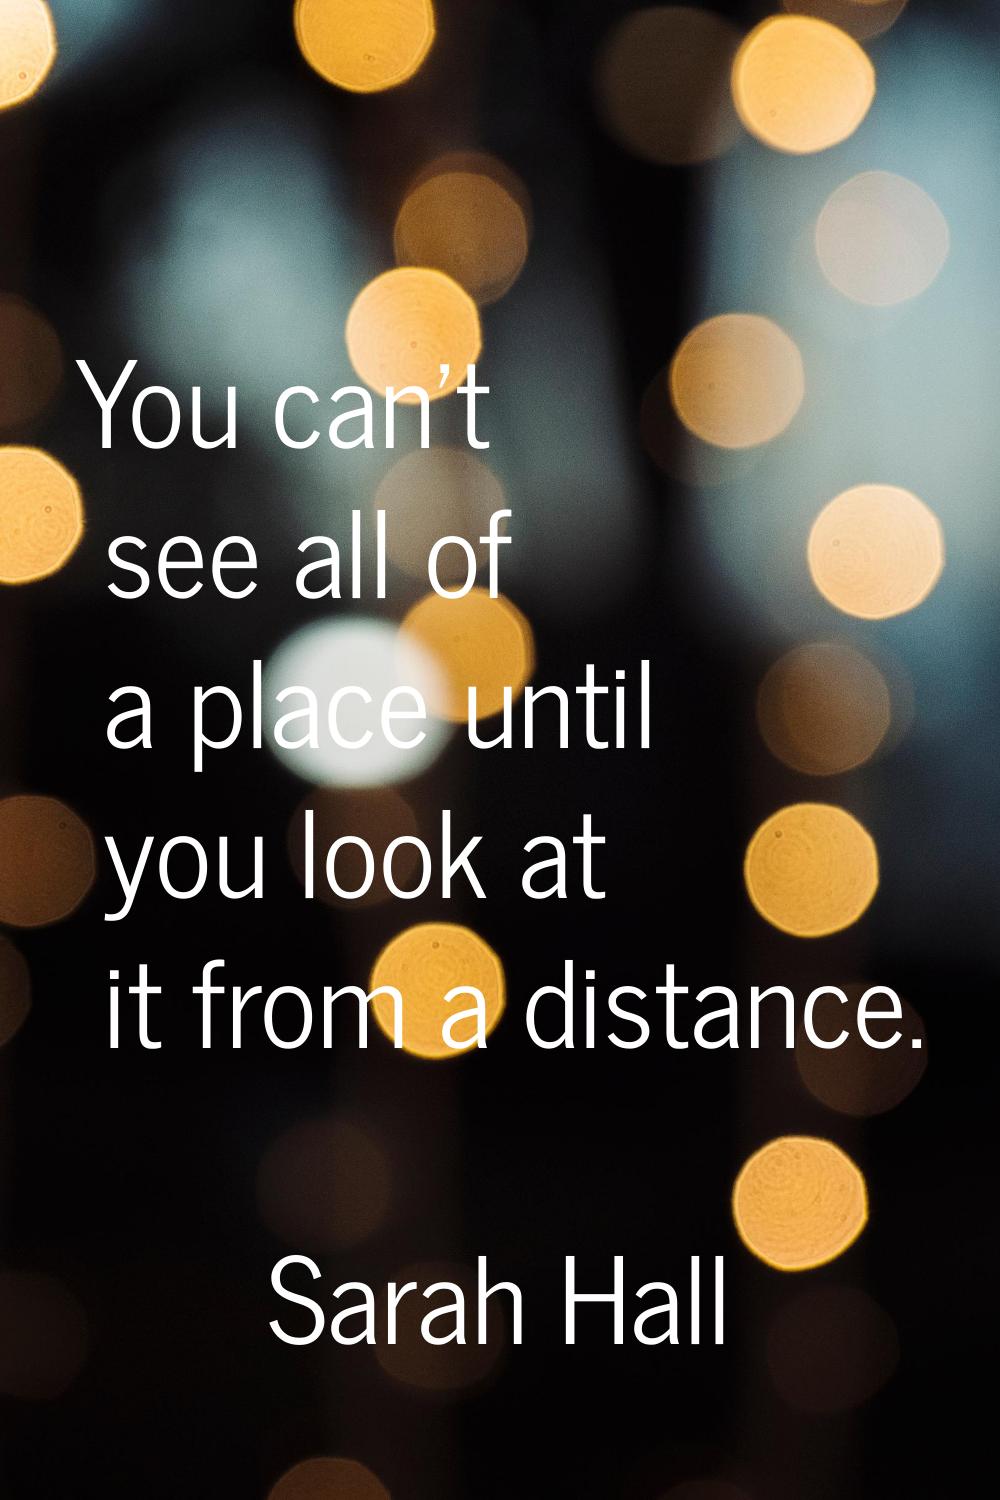 You can't see all of a place until you look at it from a distance.